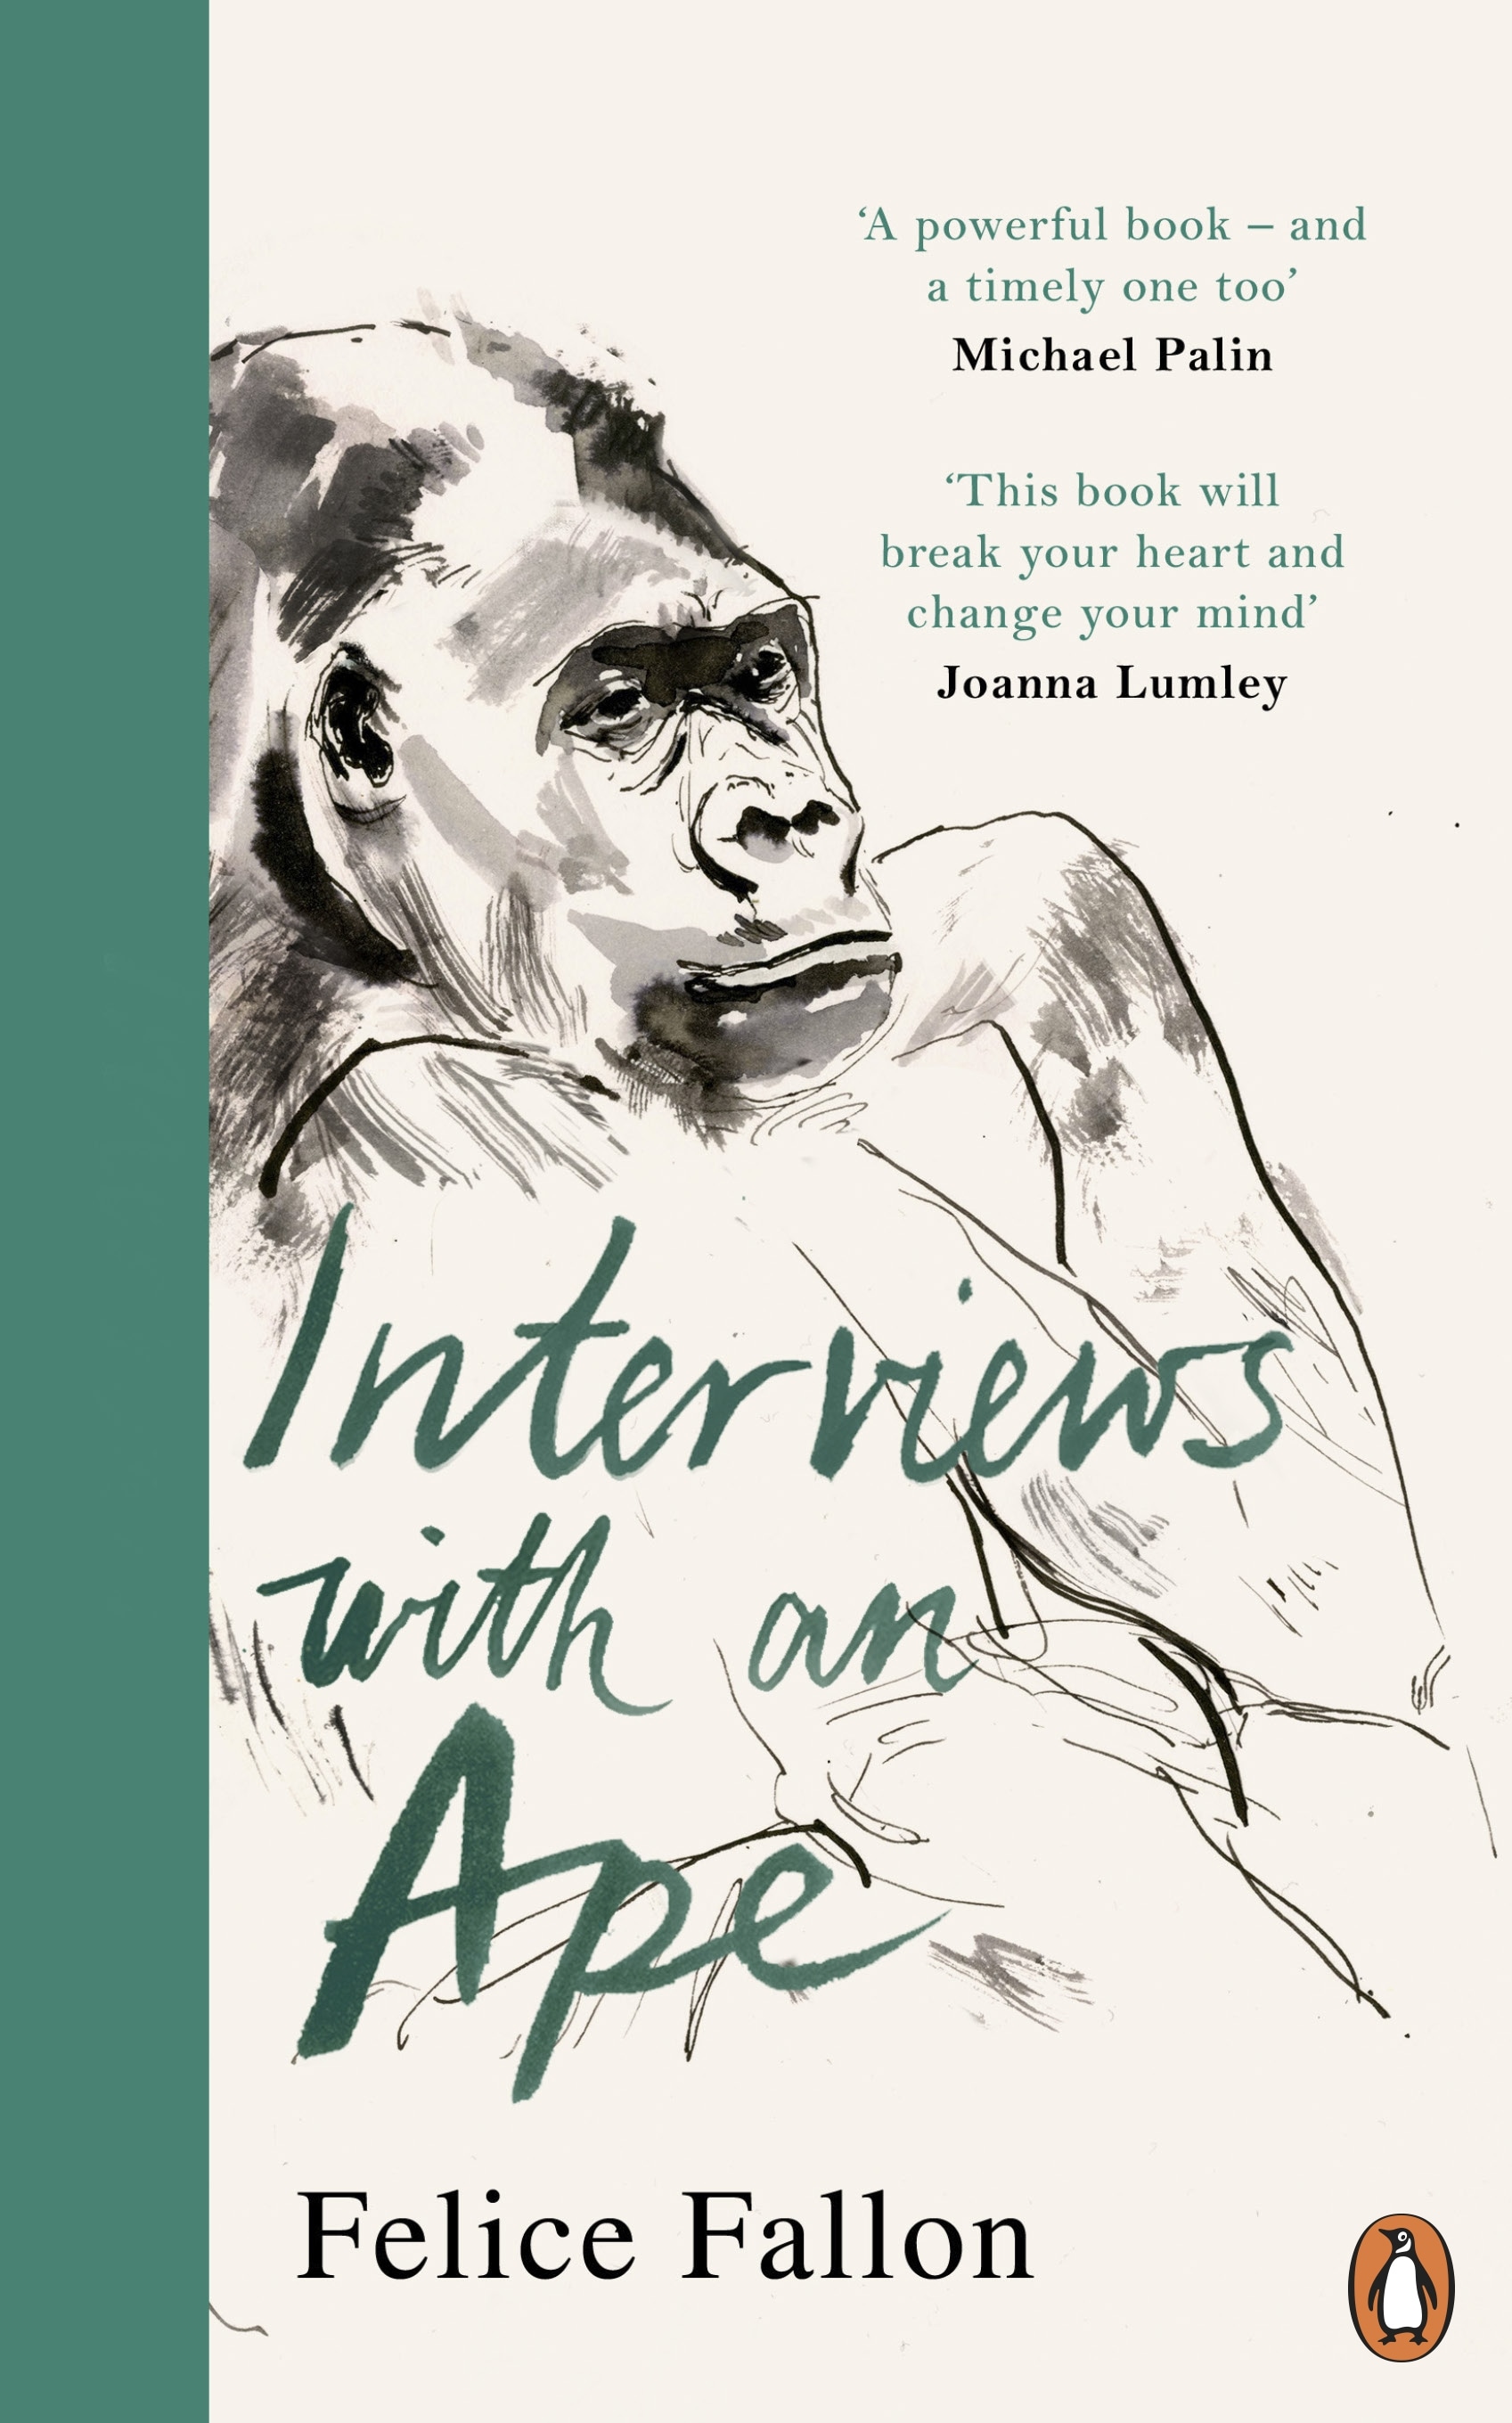 Book “Interviews with an Ape” by Felice Fallon — January 12, 2023